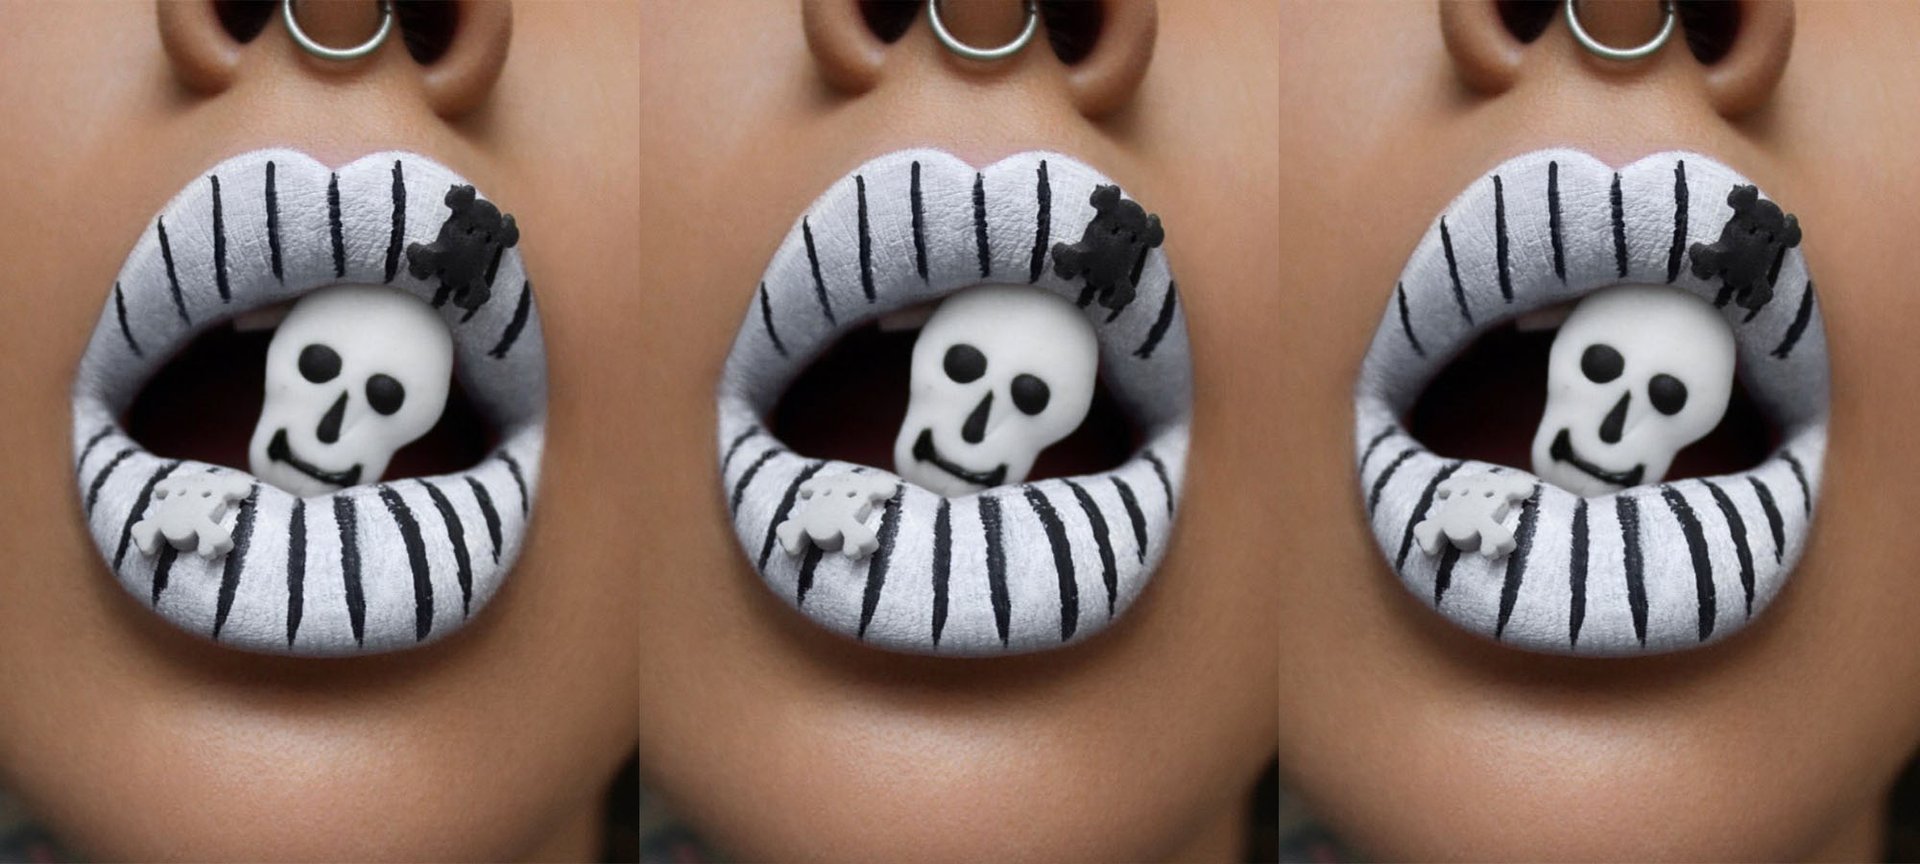 Halloween Makeup Ideas For Your Lips CMS Slide01 Bmag